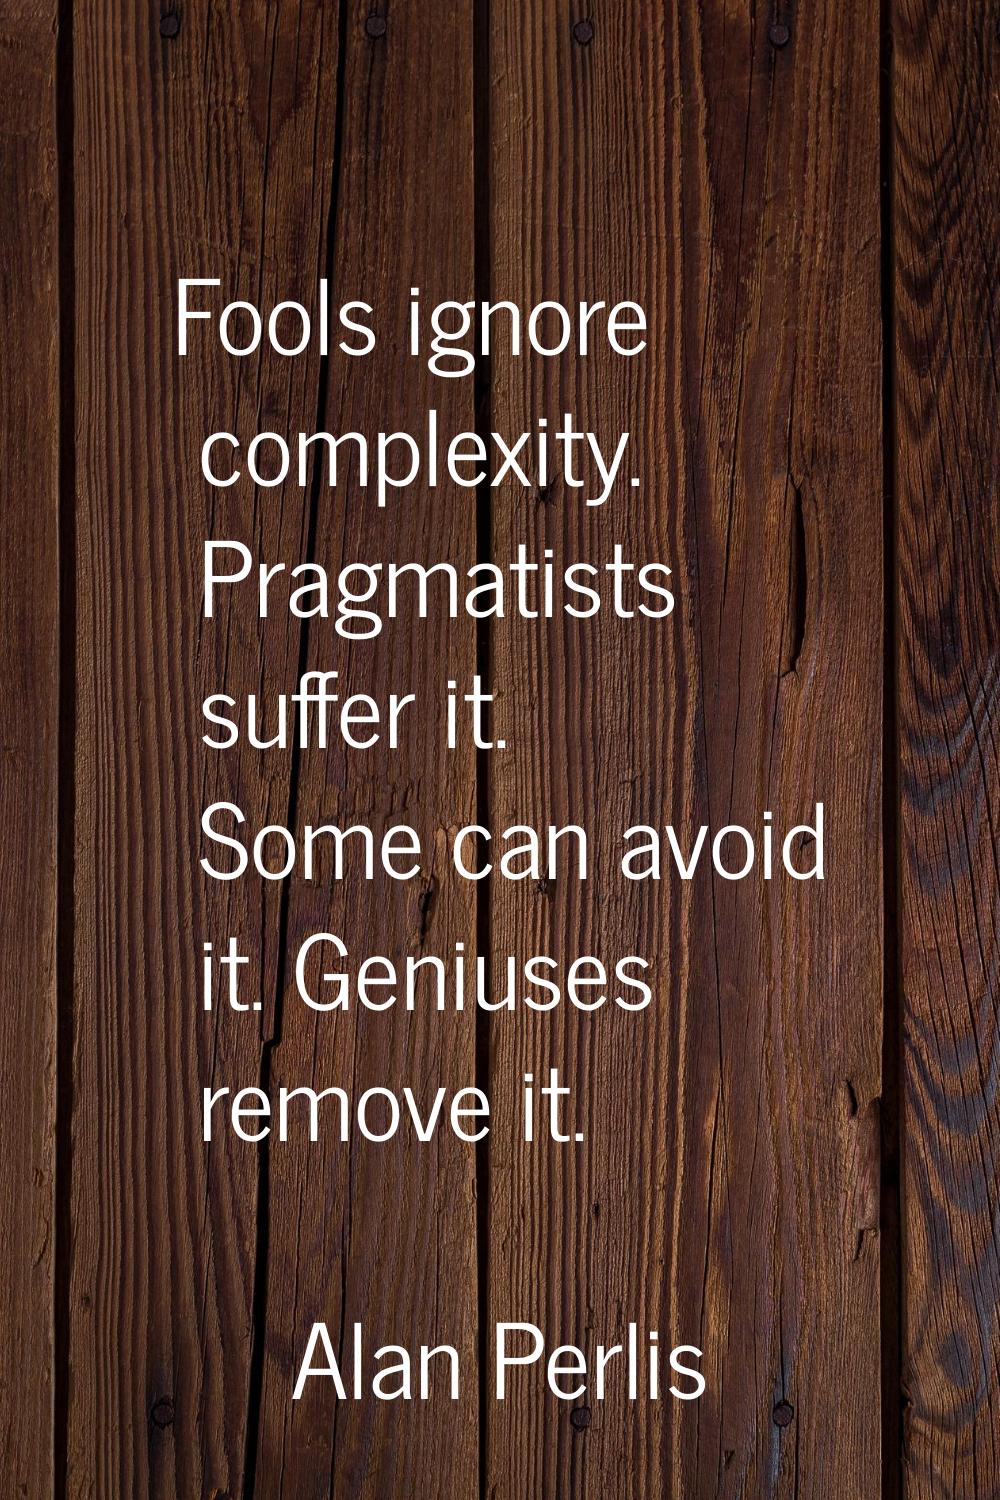 Fools ignore complexity. Pragmatists suffer it. Some can avoid it. Geniuses remove it.